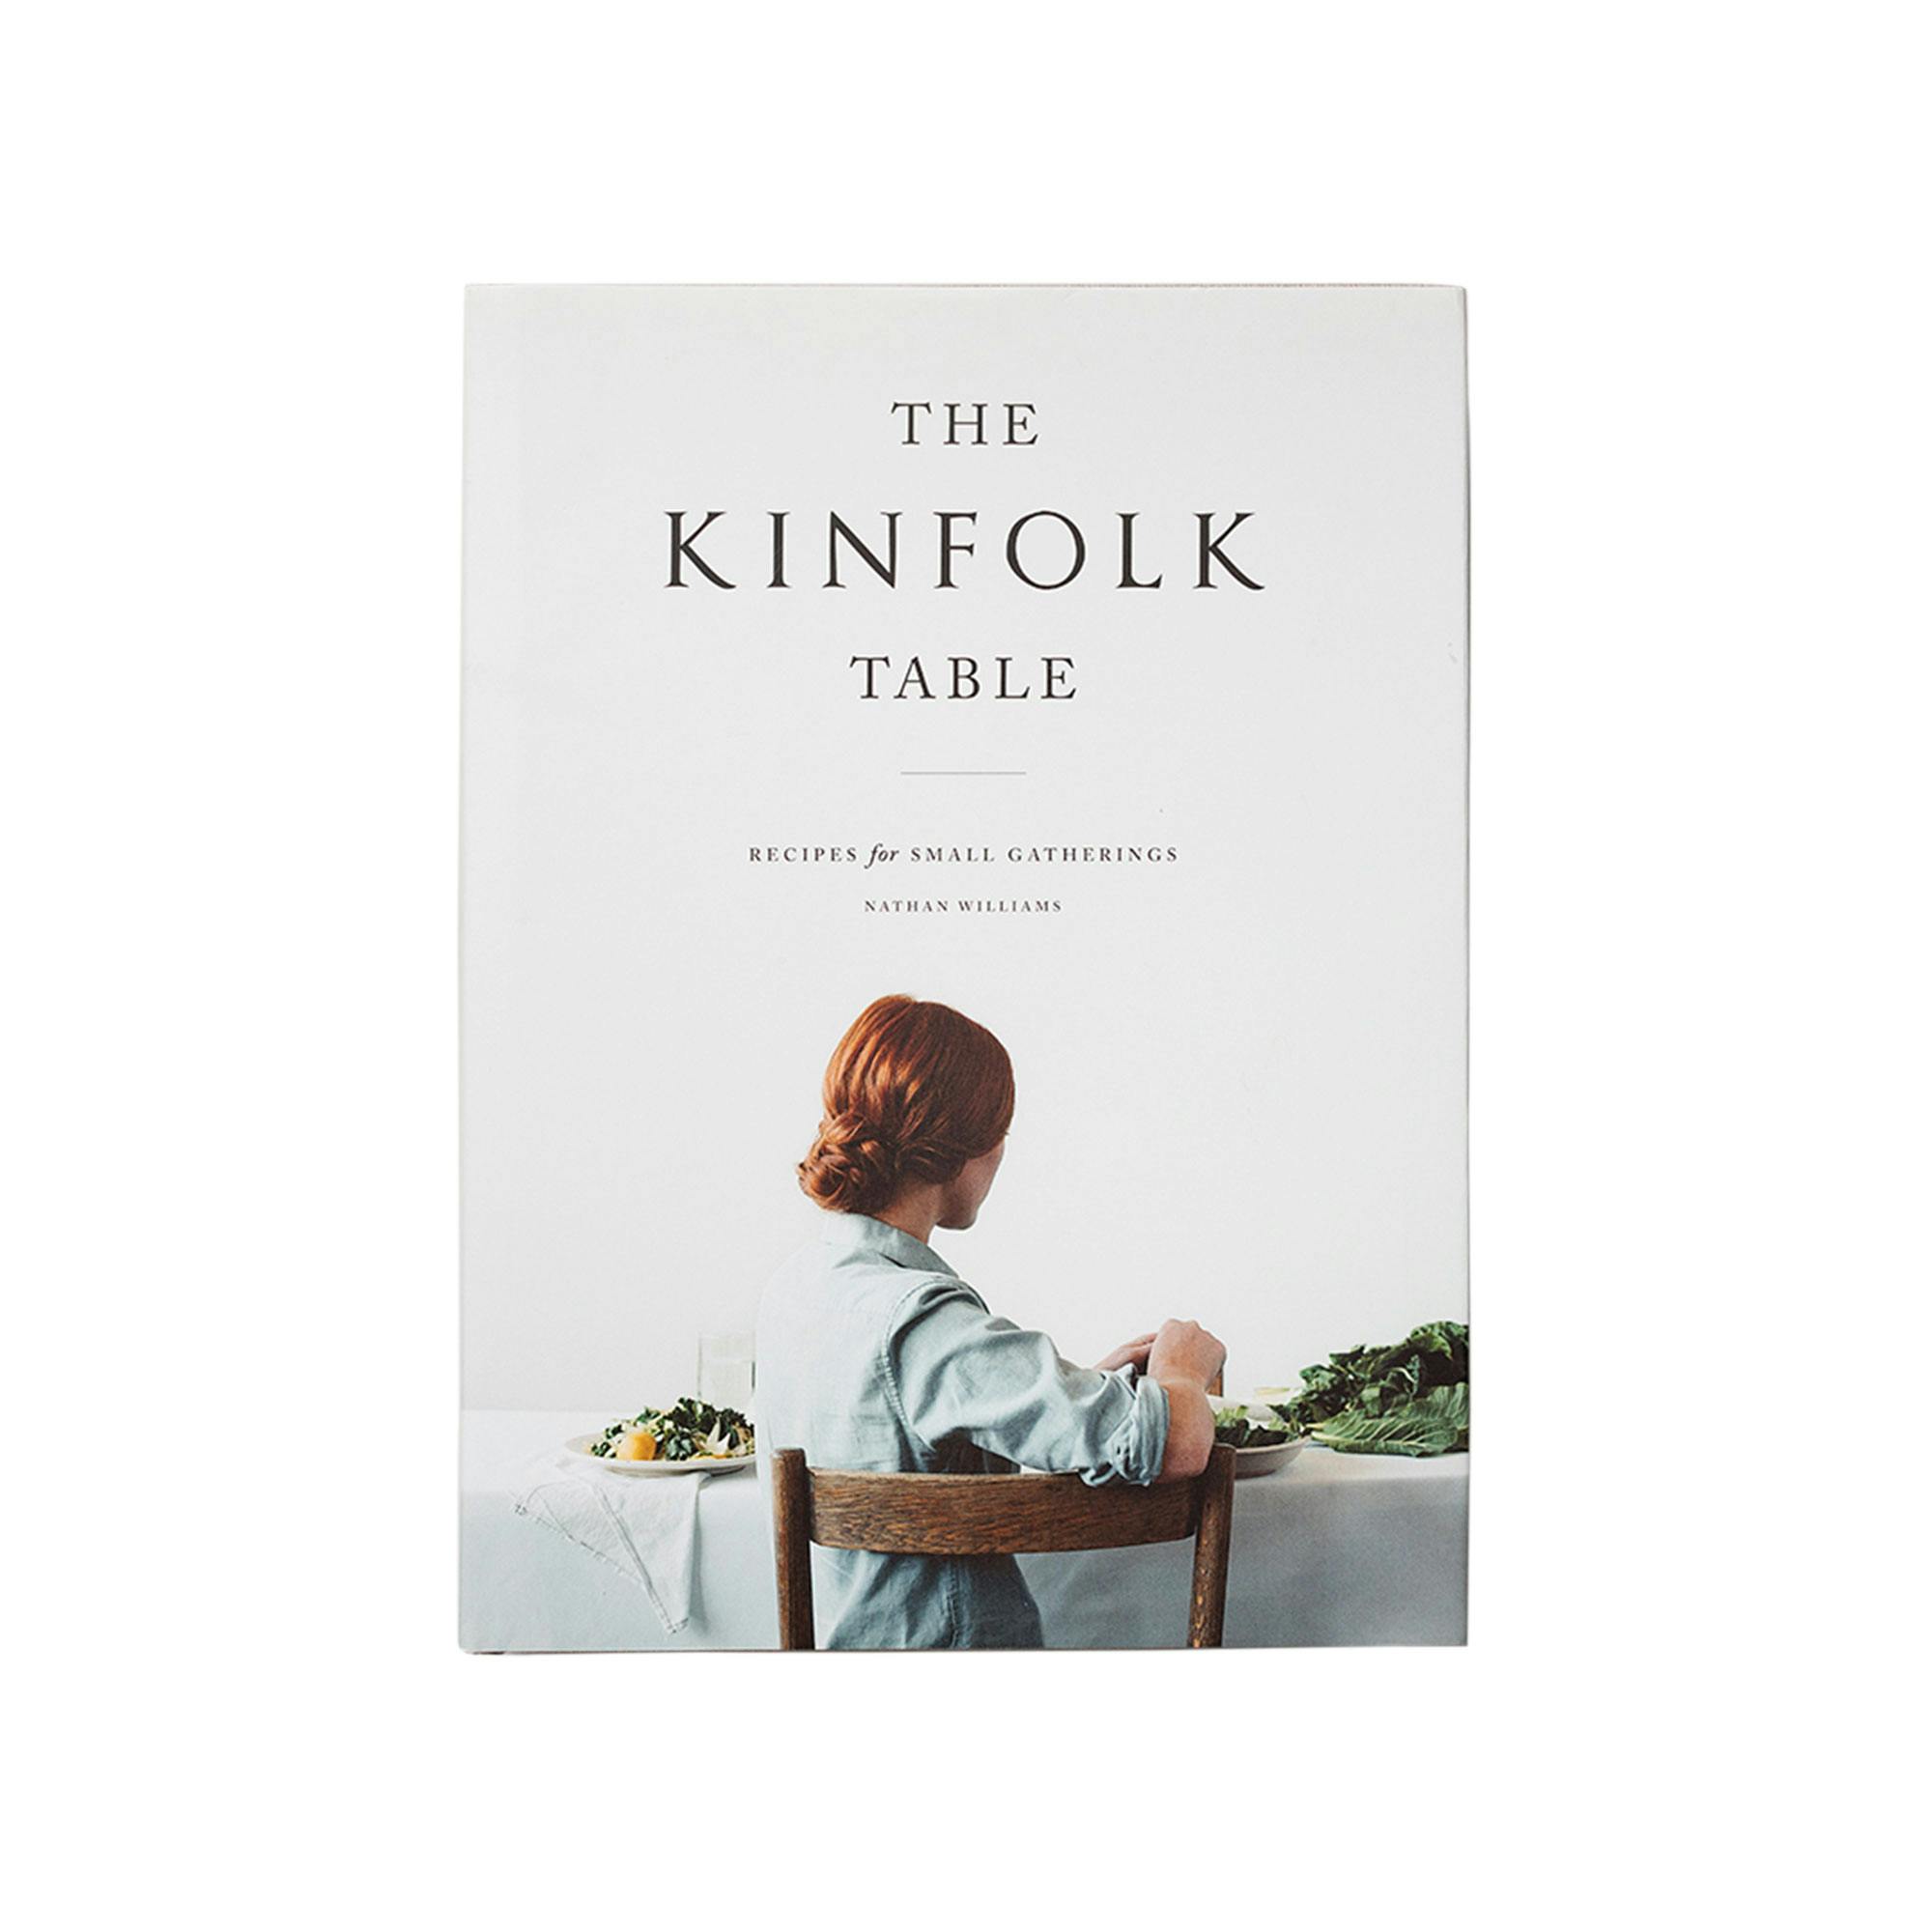 New mags - Kinfolk, table book